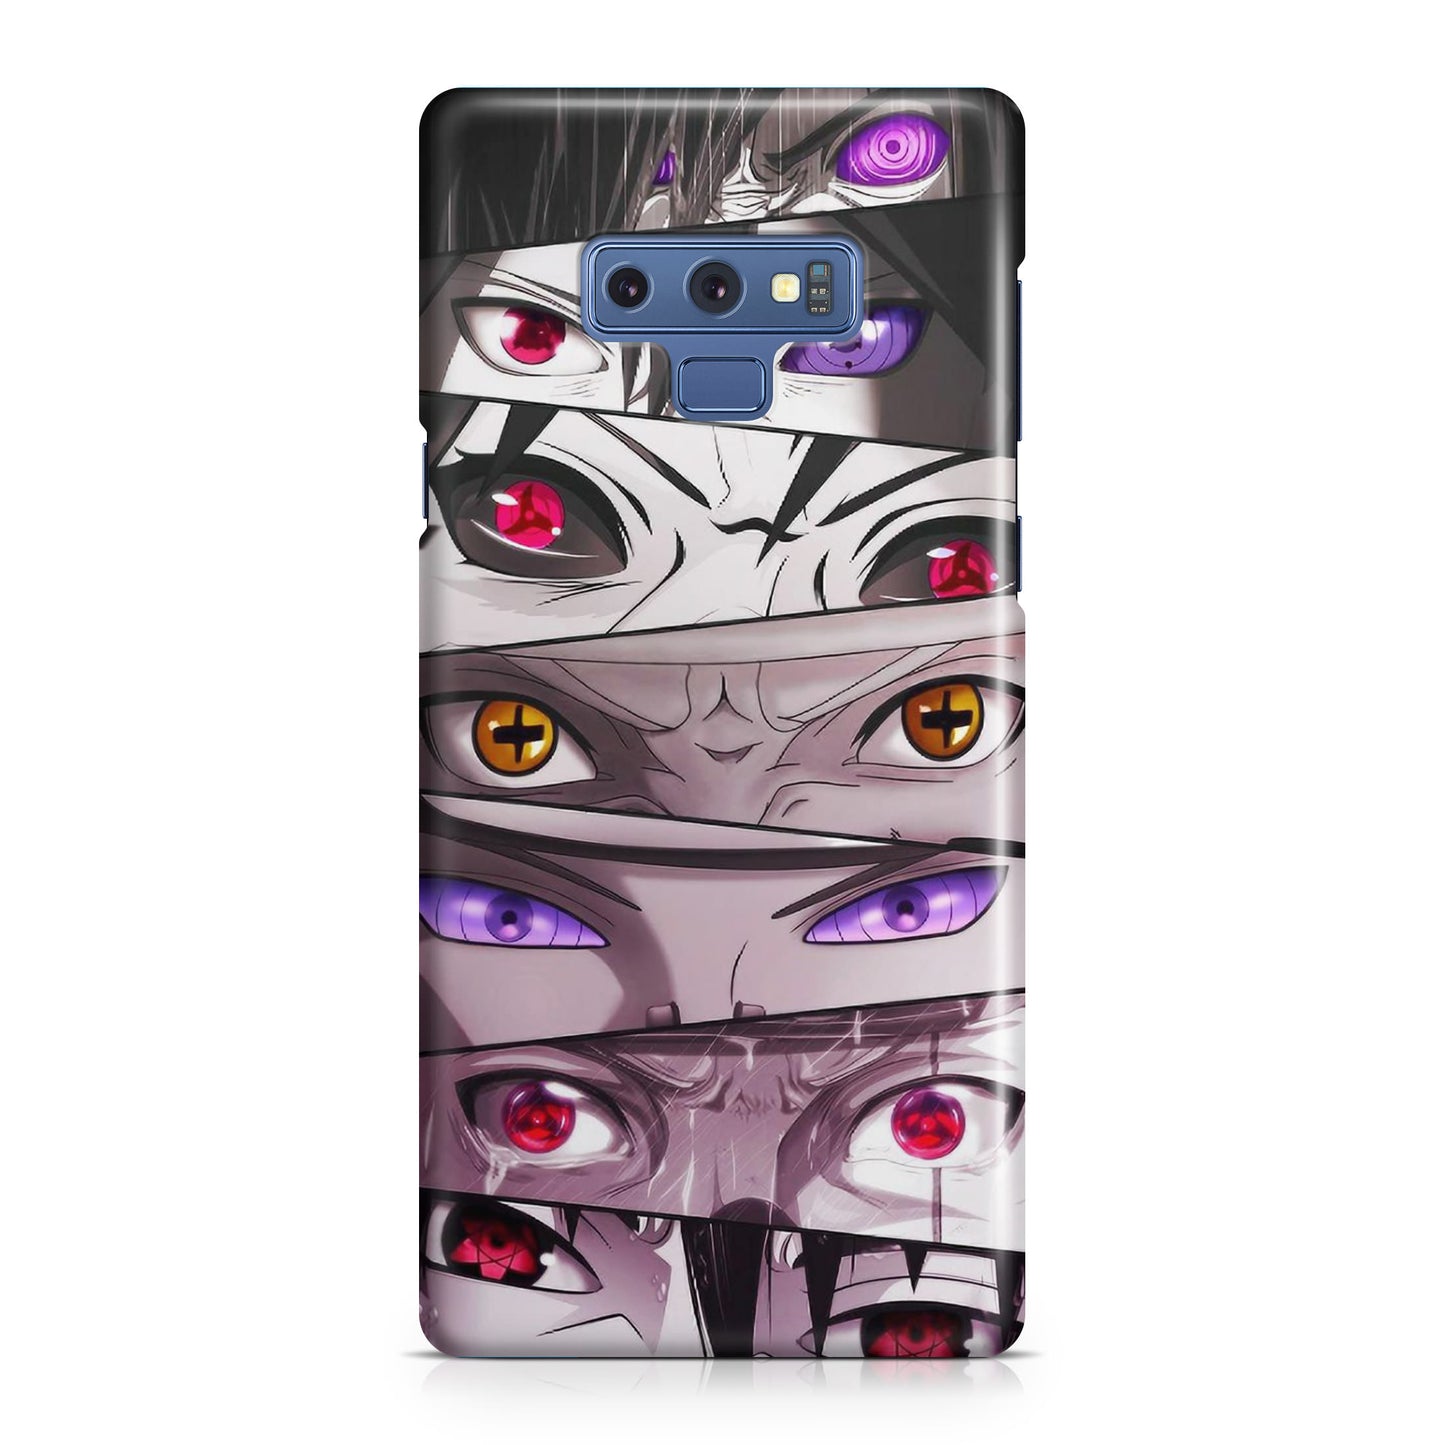 The Powerful Eyes Galaxy Note 9 Case